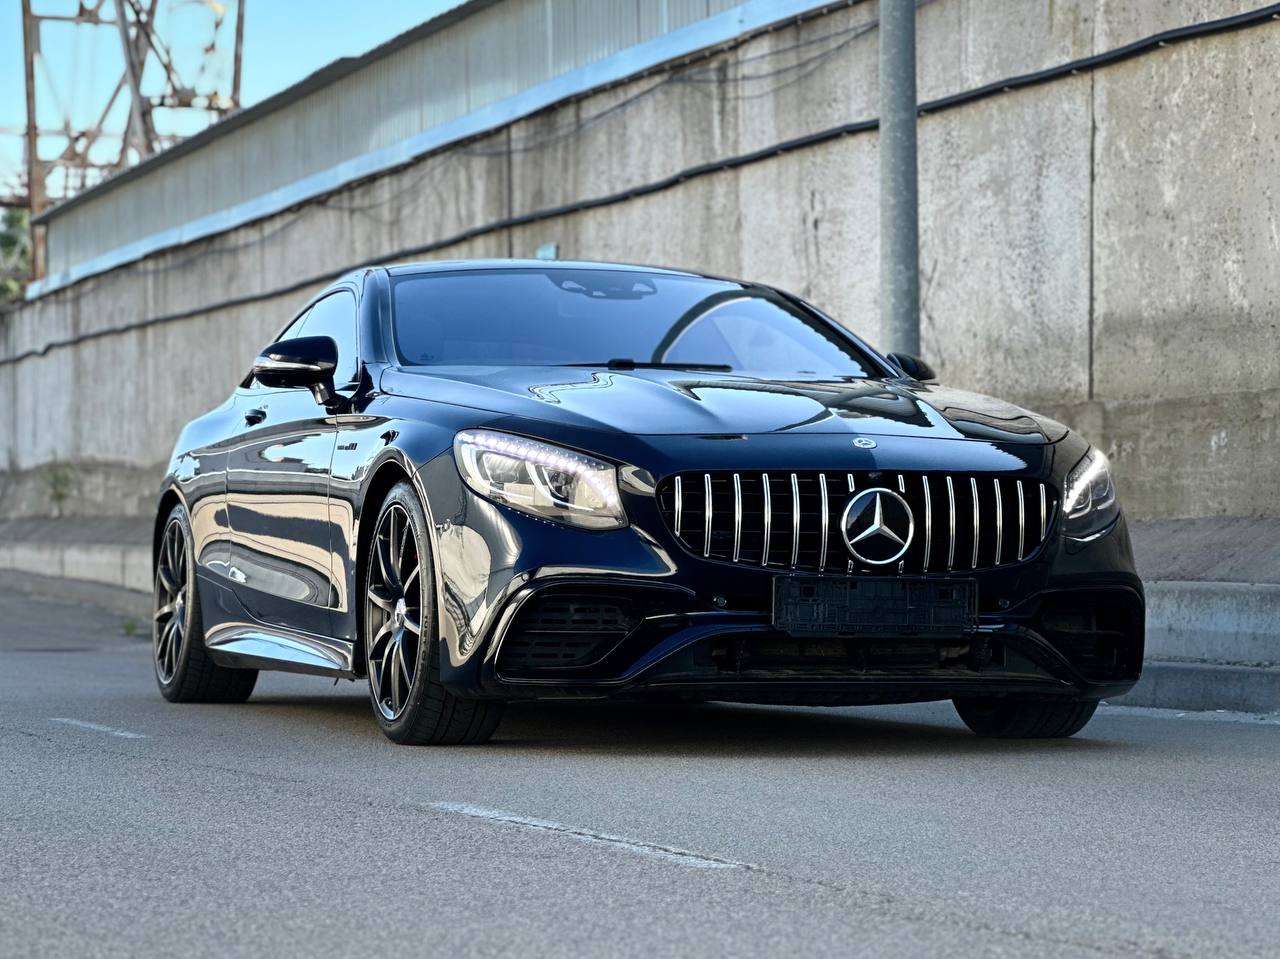   Mercedes-Benz W217 S560 AMG Coupe   - 